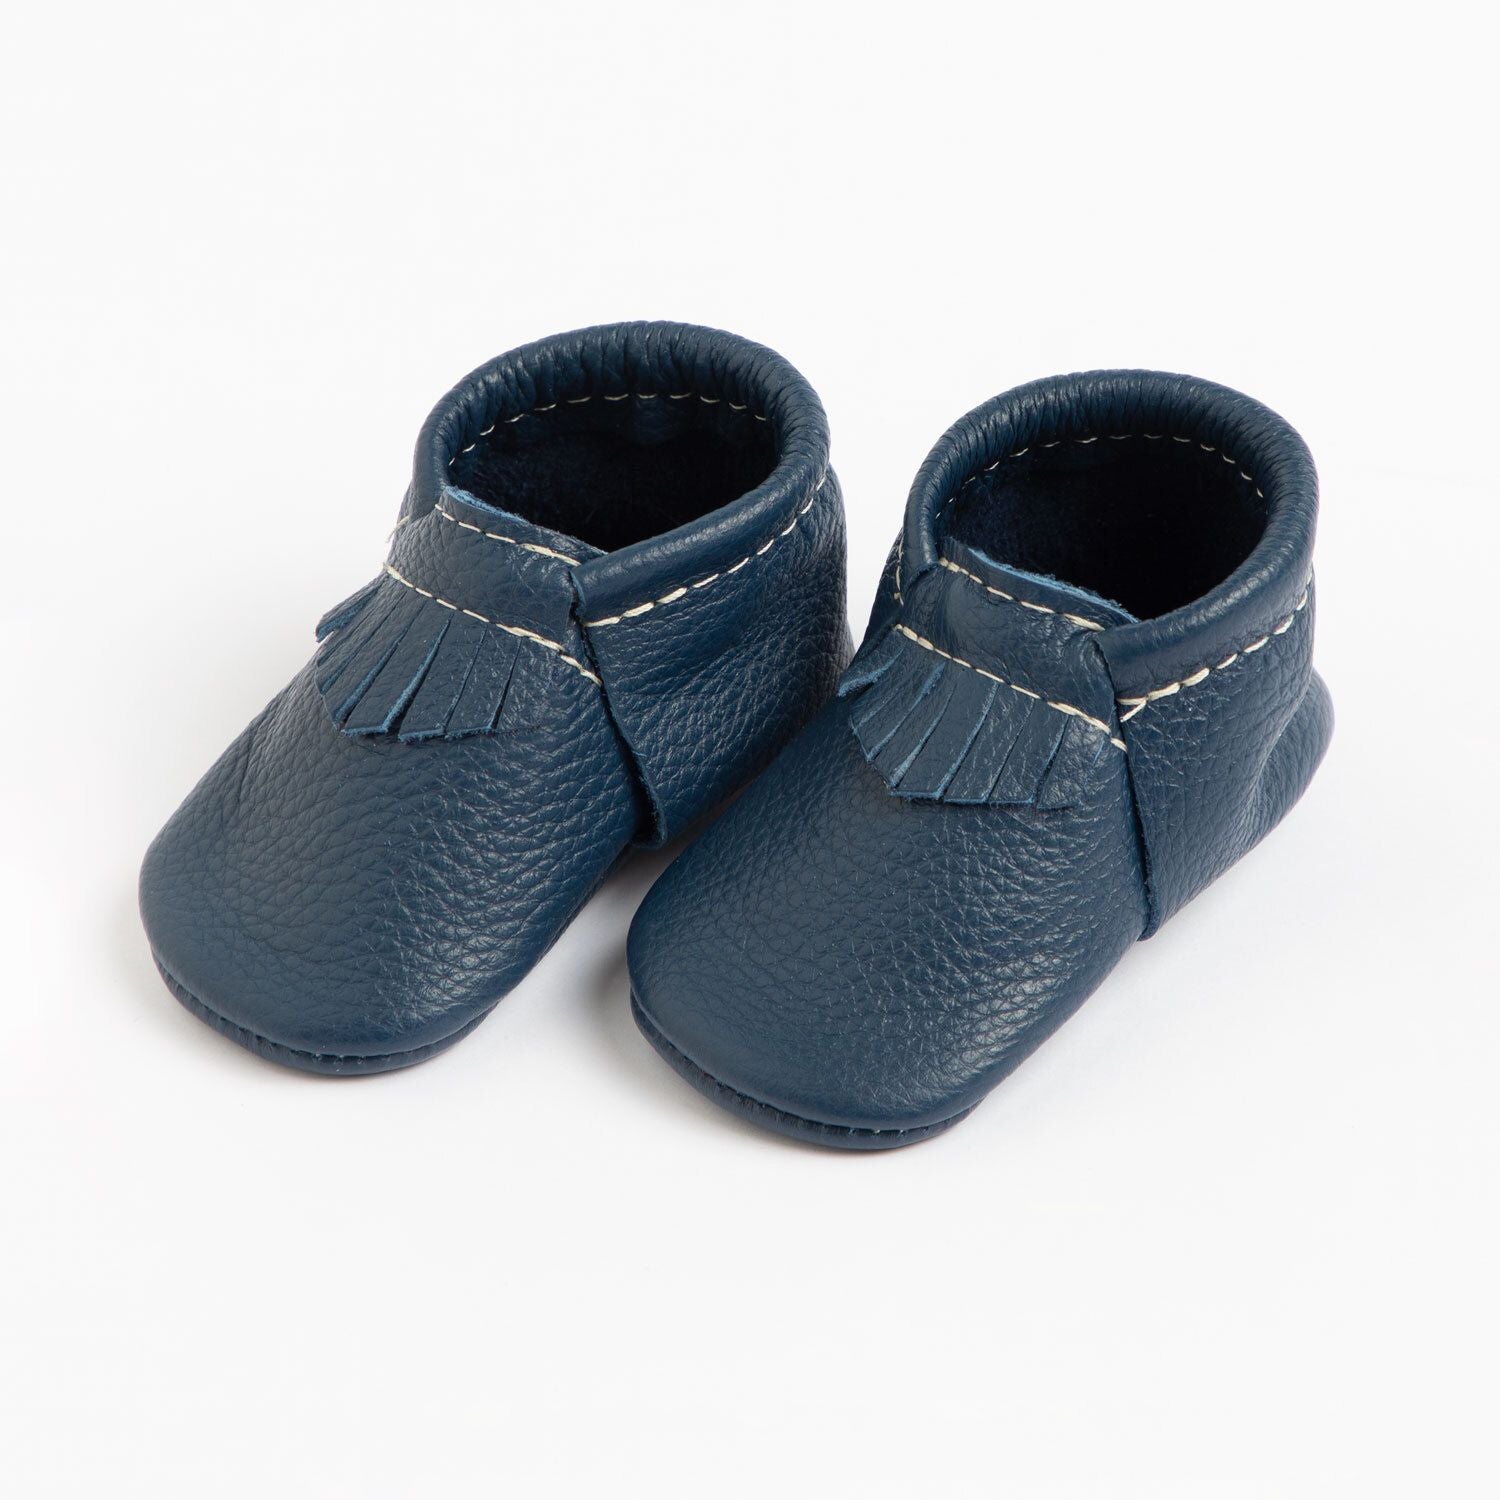 The First Pair City Mocc in Anchor  - Doodlebug's Children's Boutique